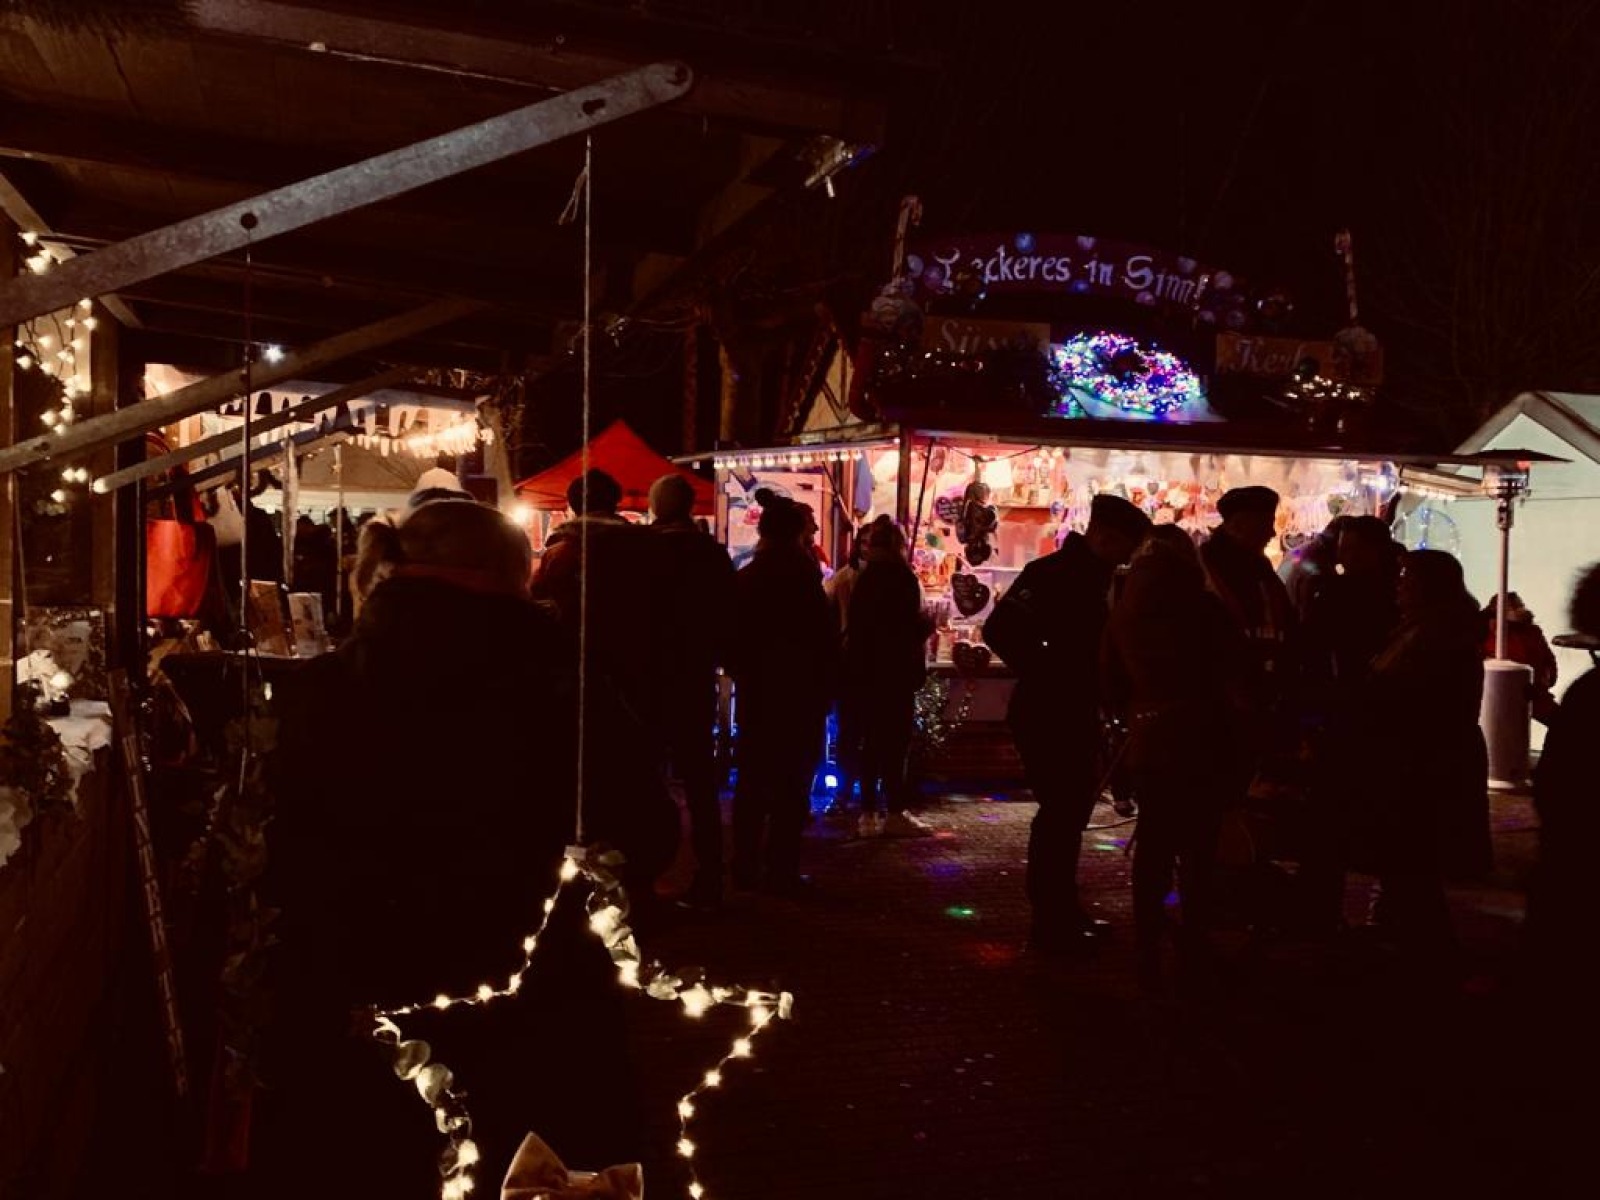 Christmas market aisles with illuminated wooden chalets